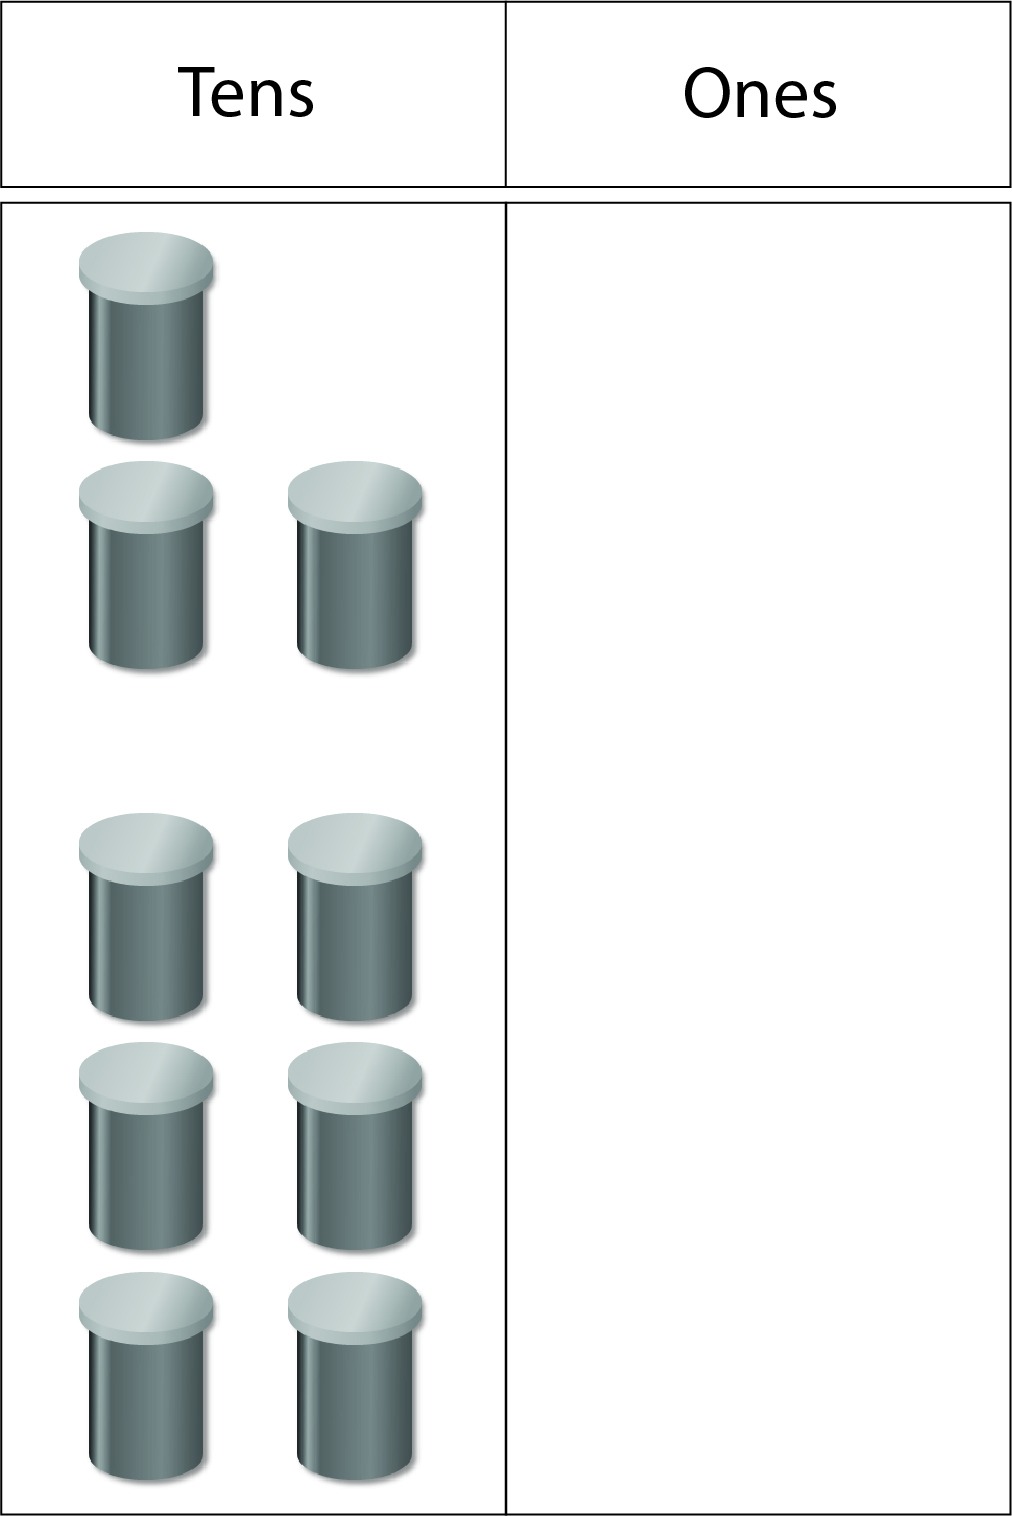 Image of nine ten-bean canisters, organised into a group of three and a group of six, in the tens column of a two column (tens and ones) place value board.